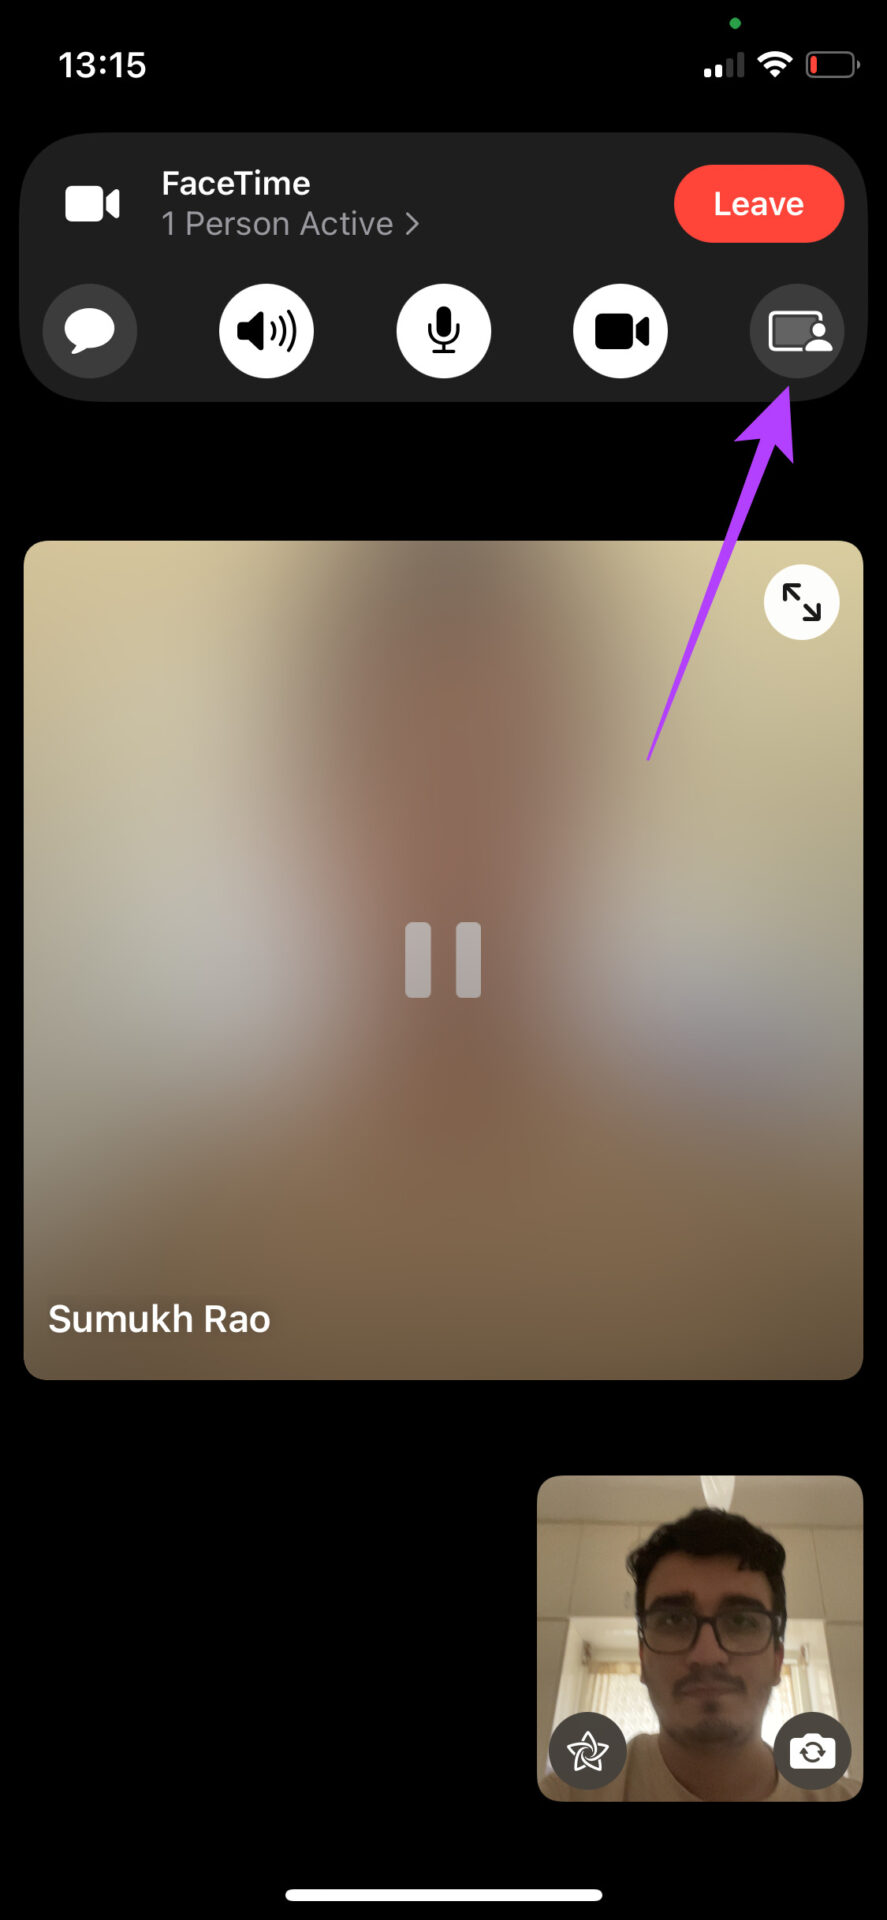 Share screen in FaceTime